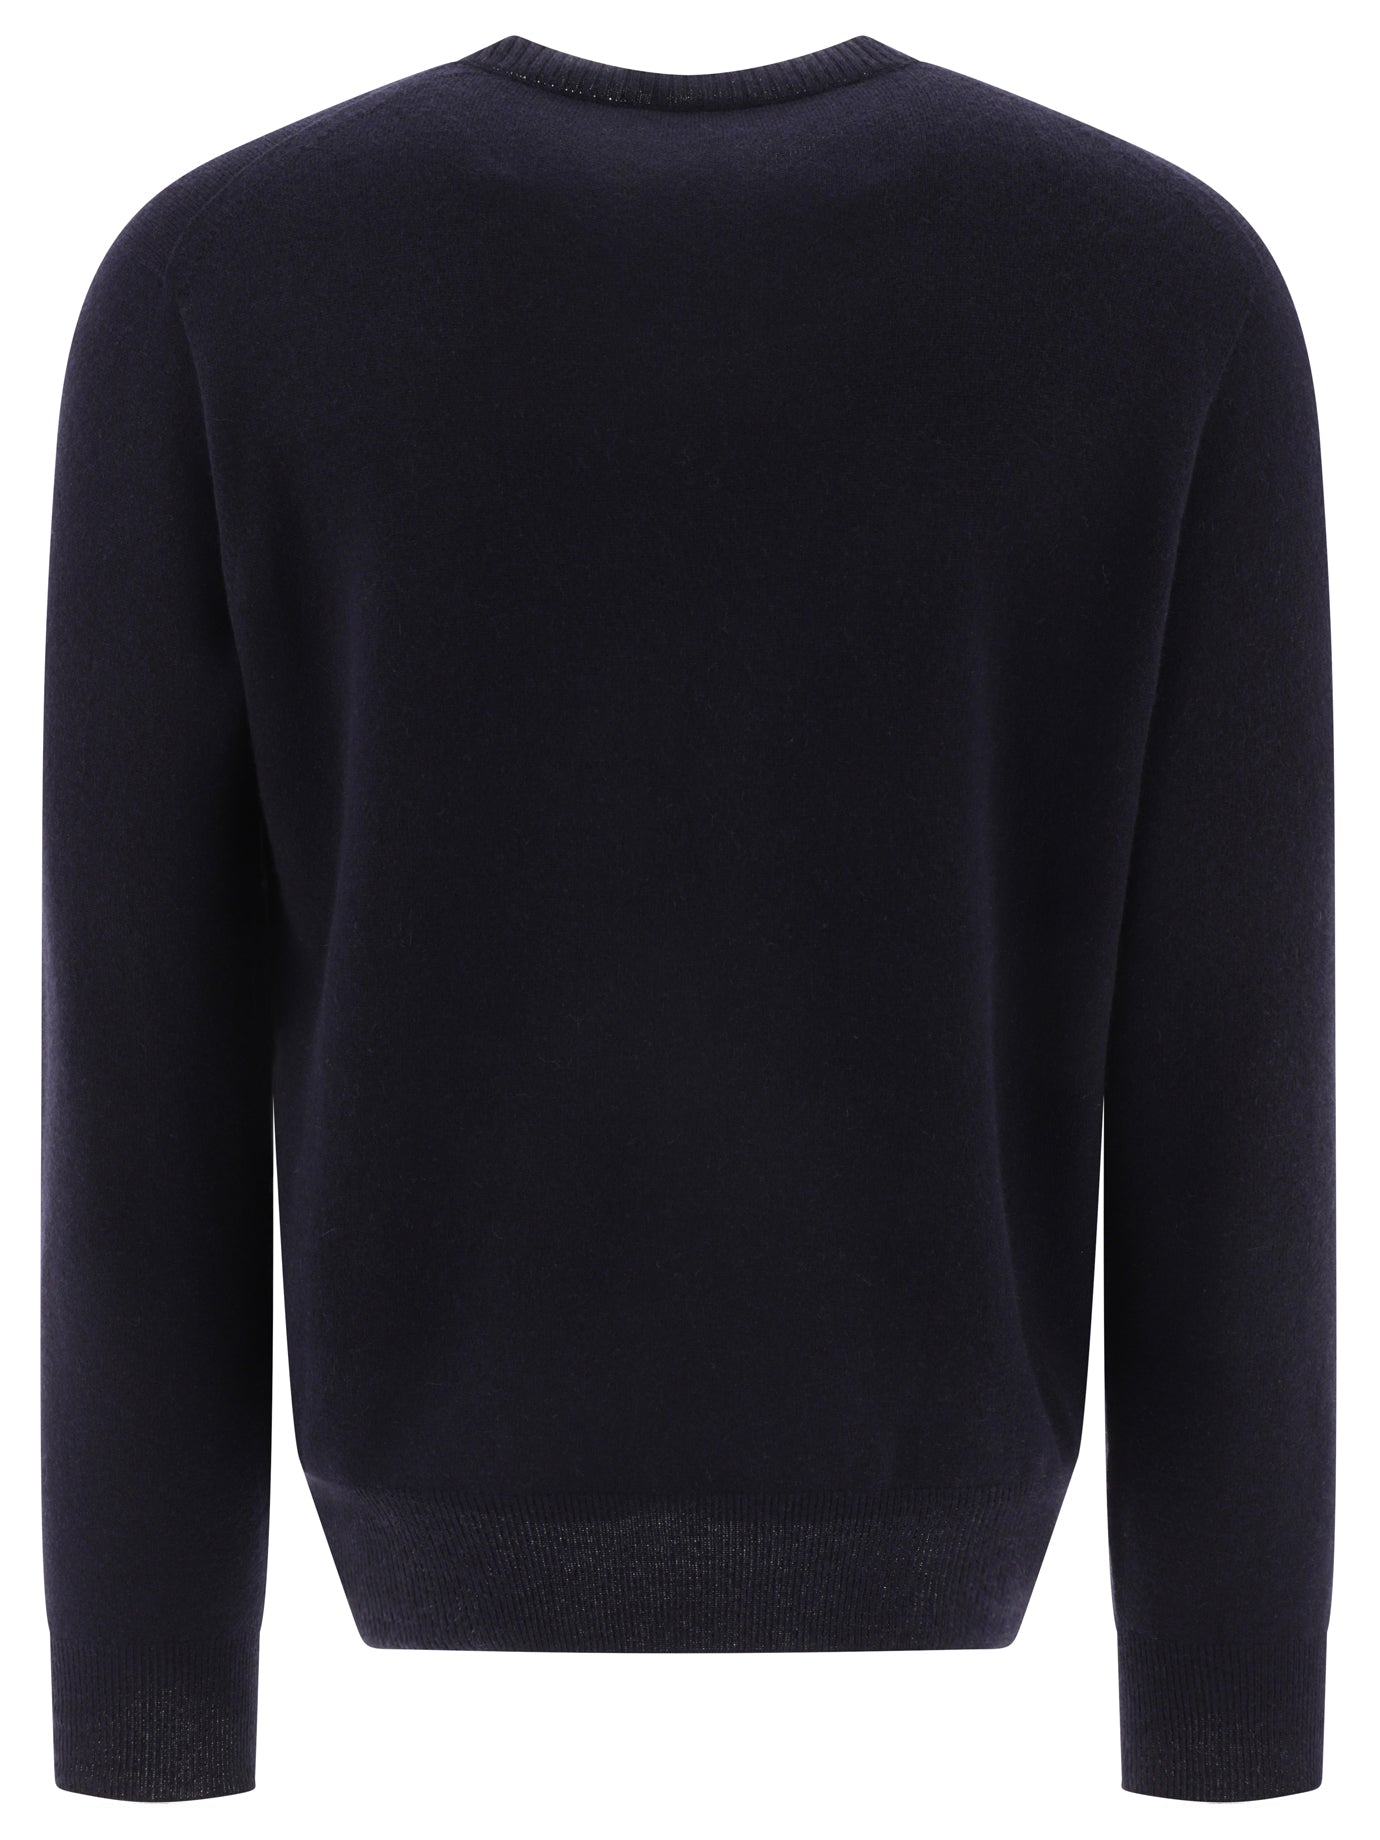 Shop Tom Ford Cashmere Crewneck Sweater In Navy